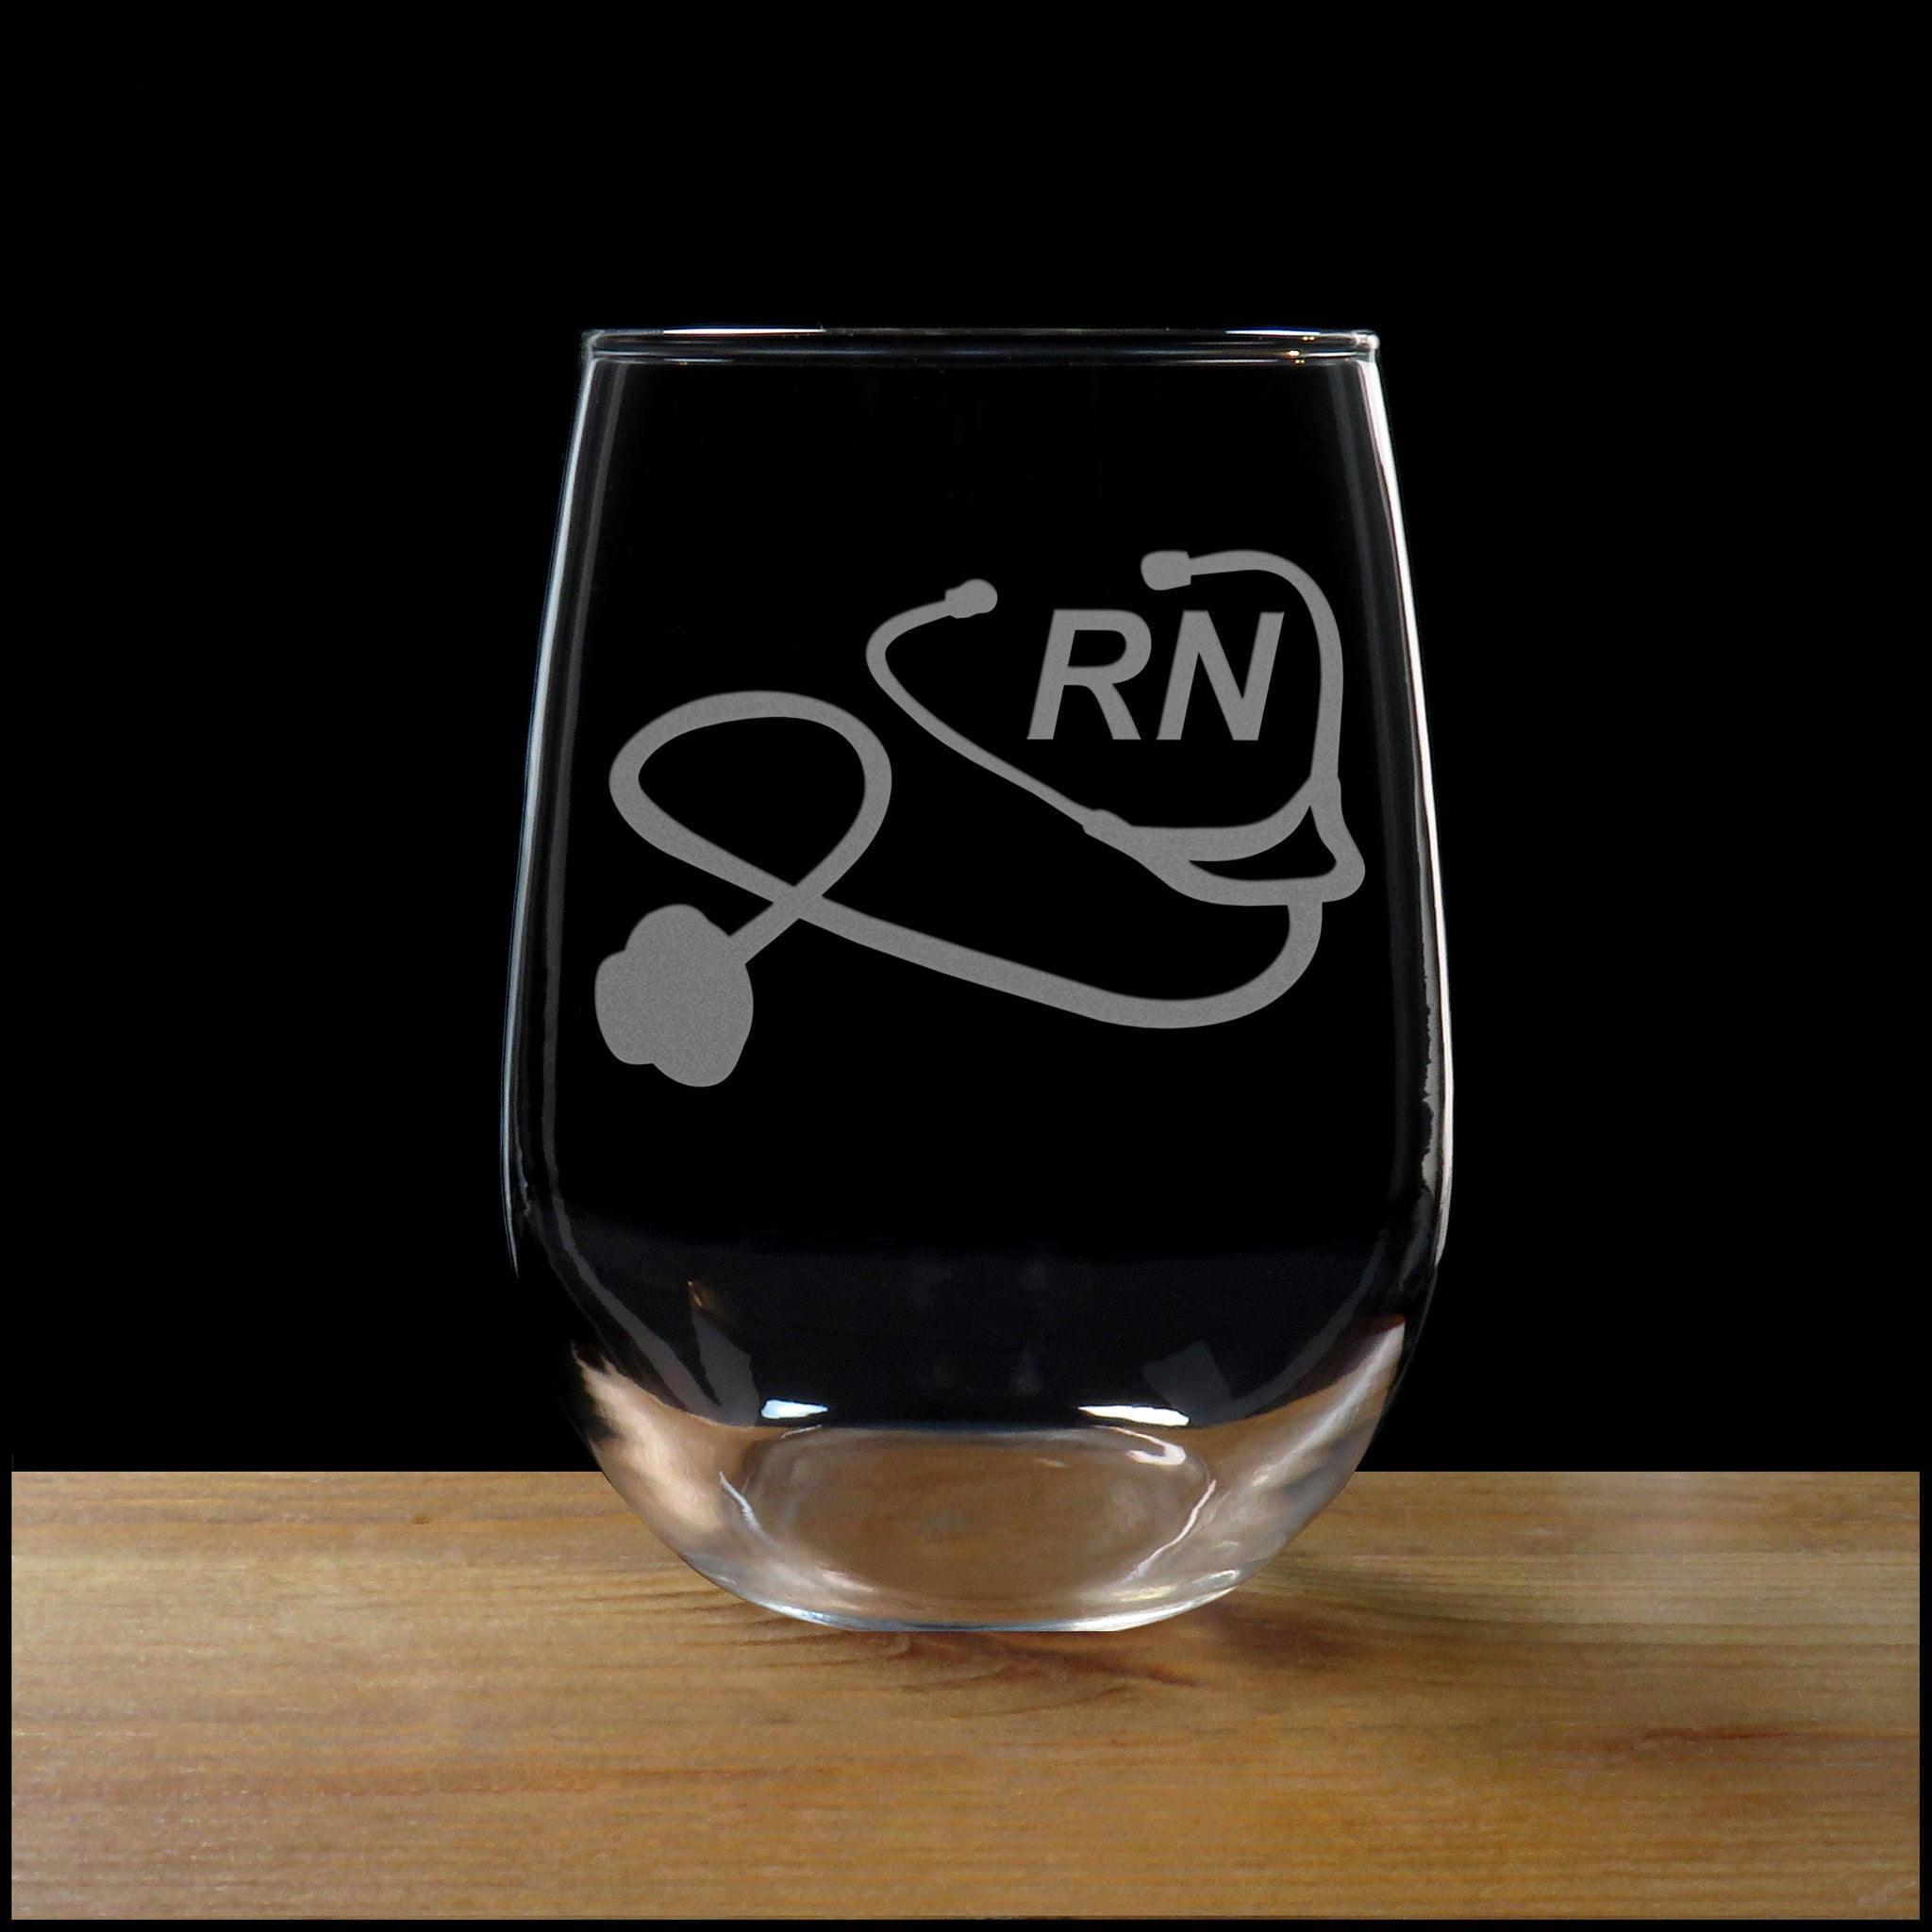 Registered Nurse Personalized Stemless Wine Glass - Copyright Hues in Glass